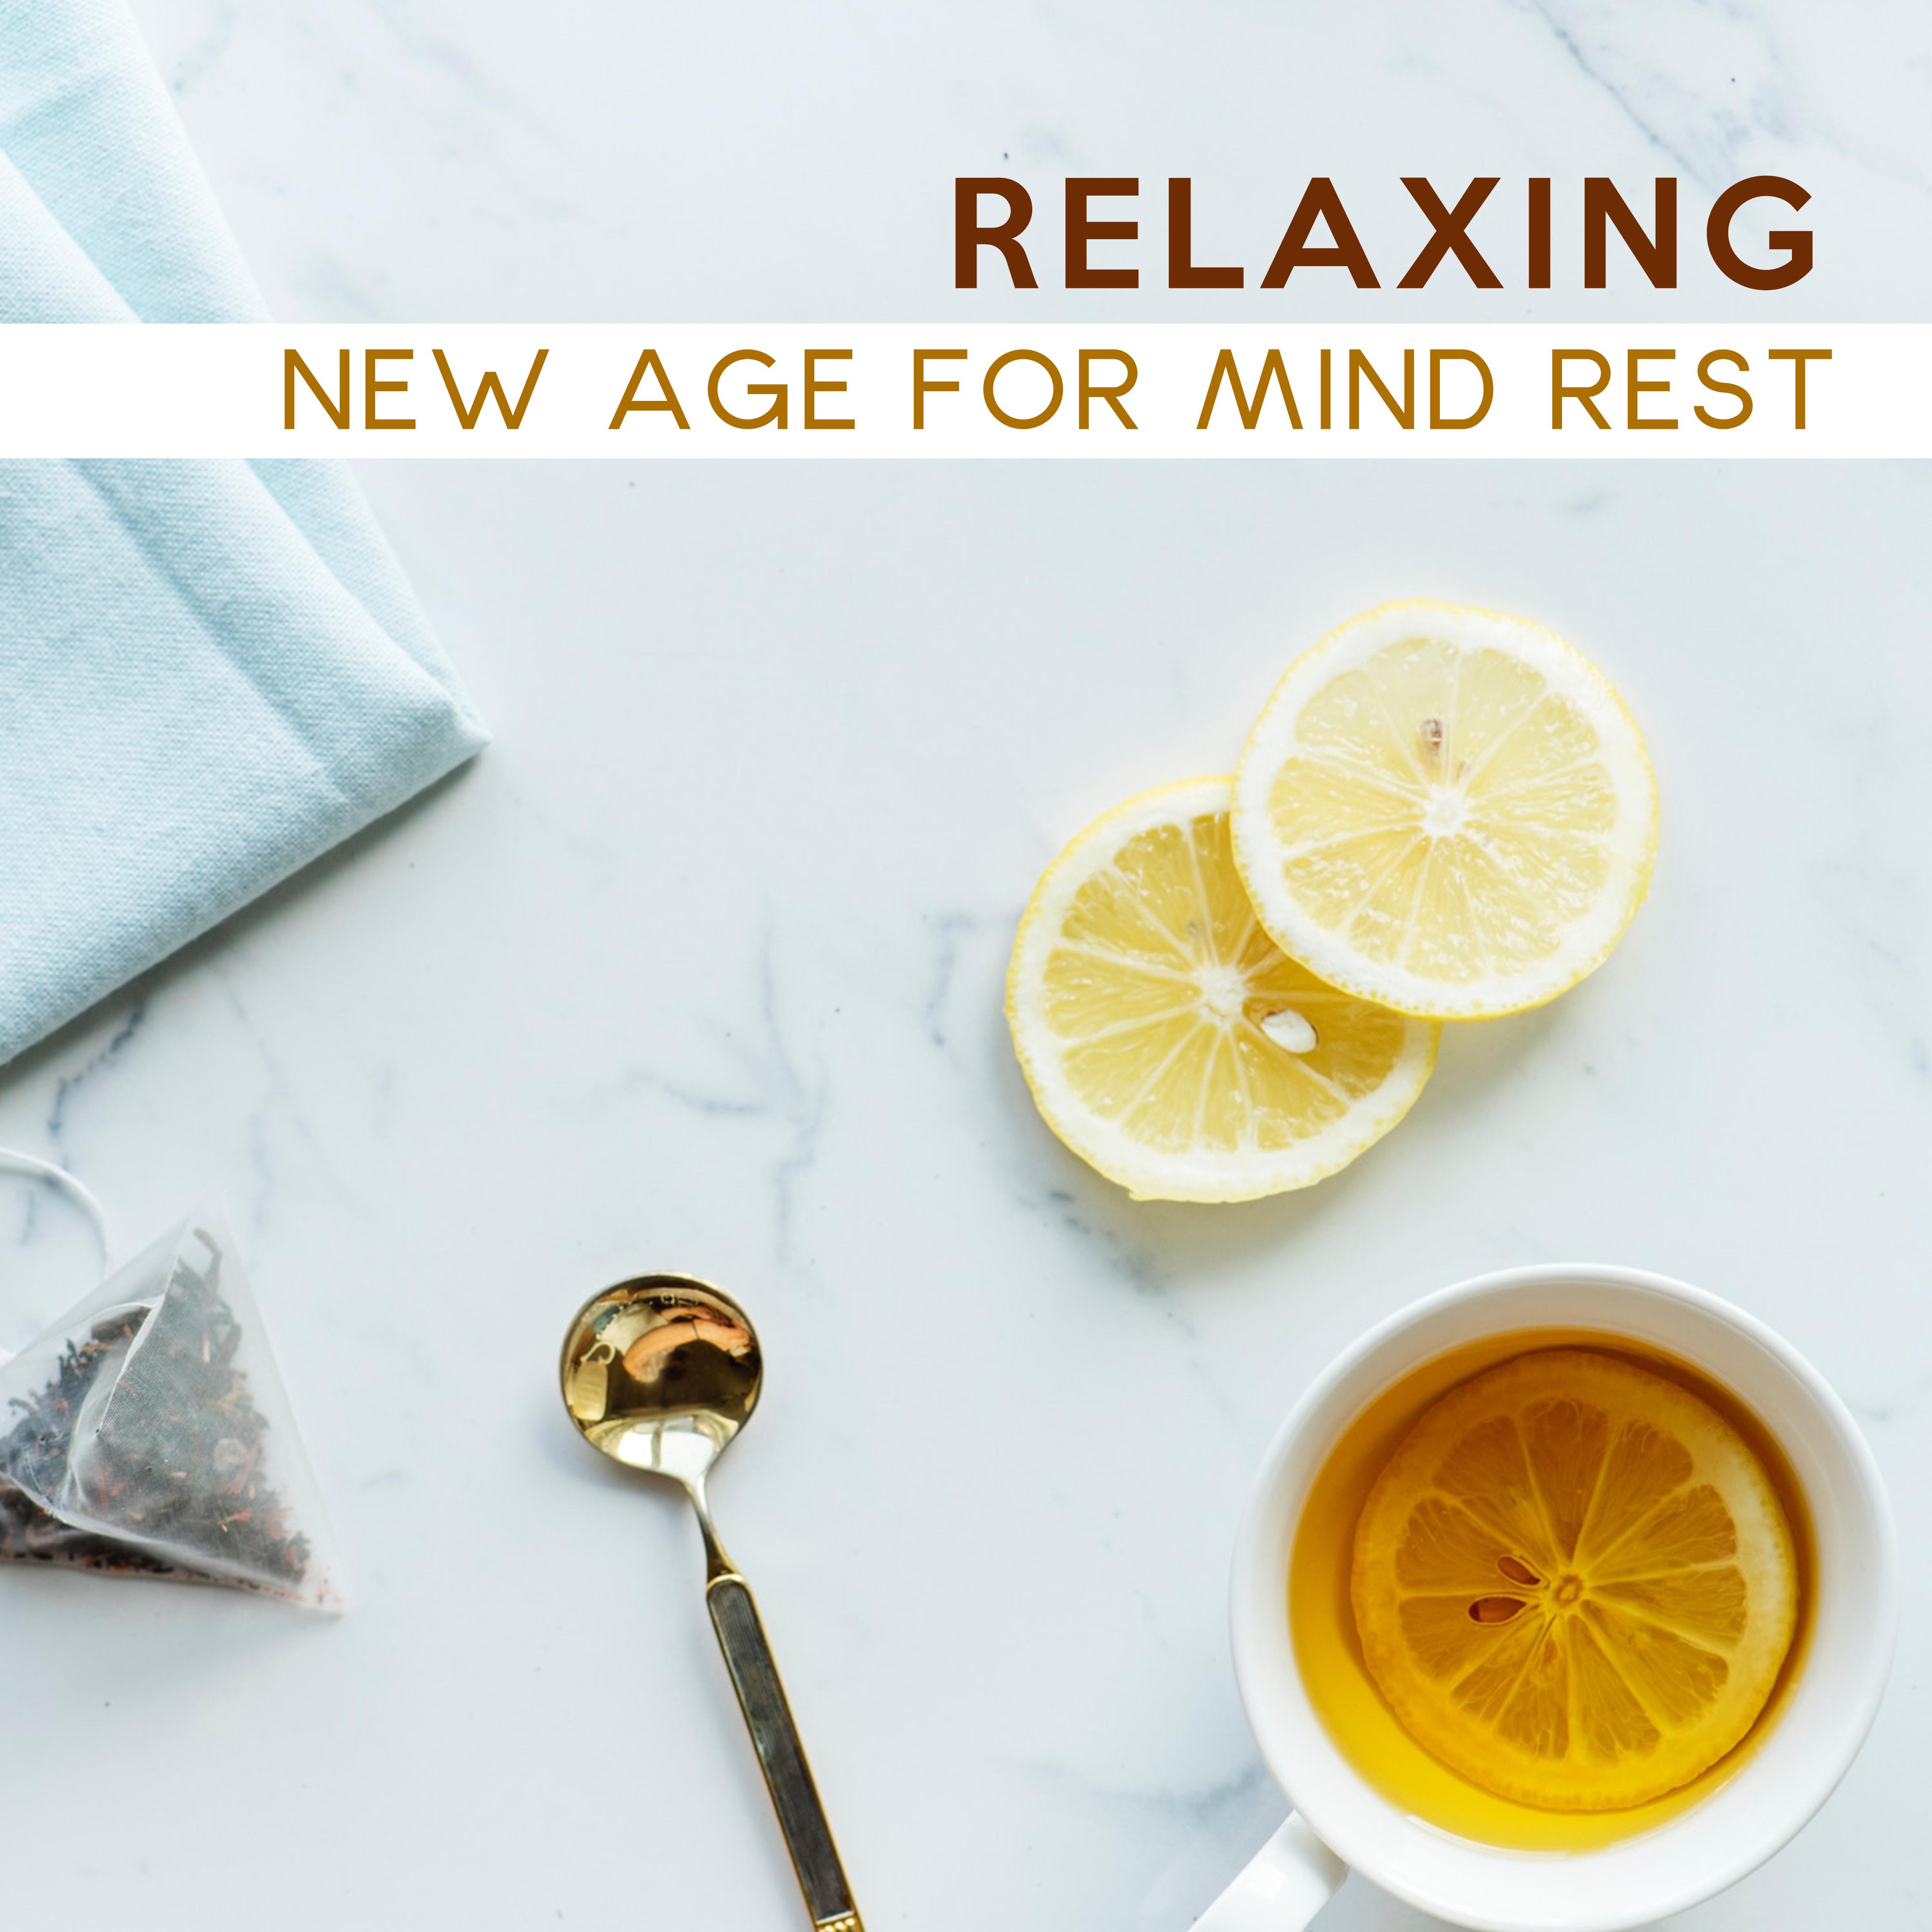 Relaxing New Age for Mind Rest